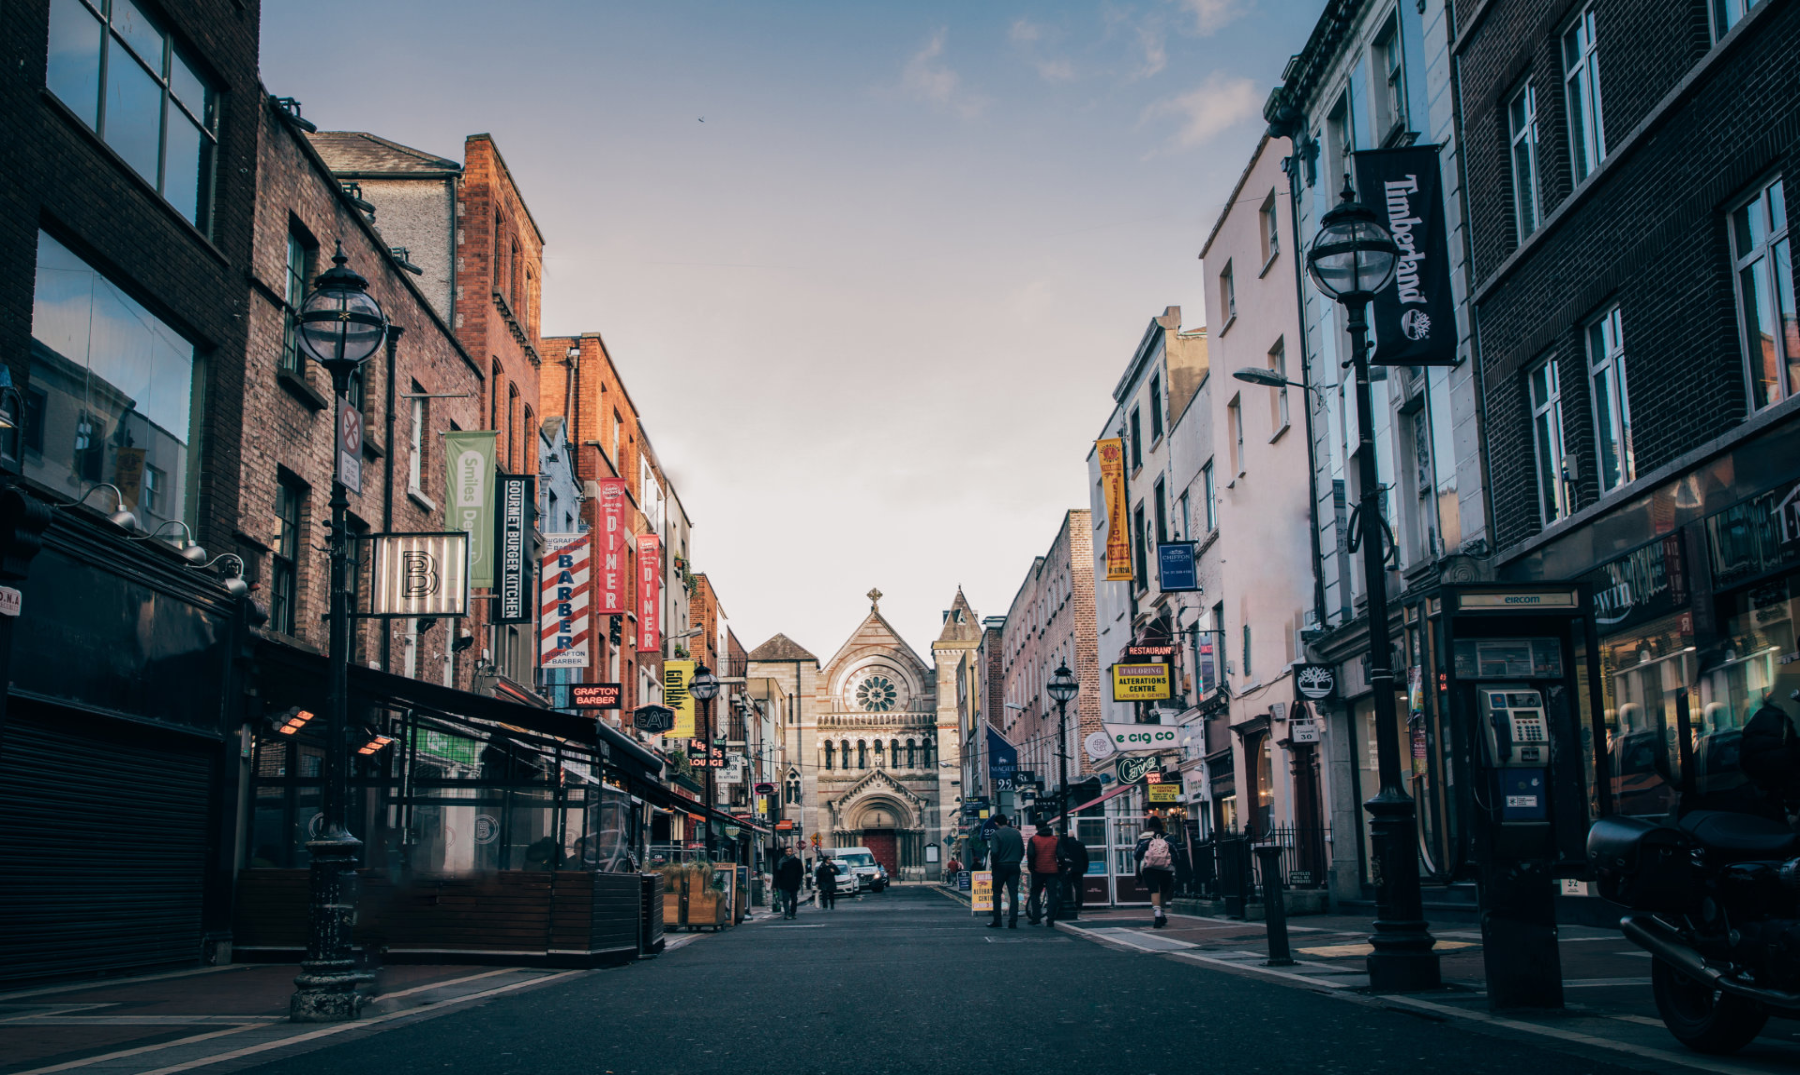 Working in Ireland | All you need to know before you go